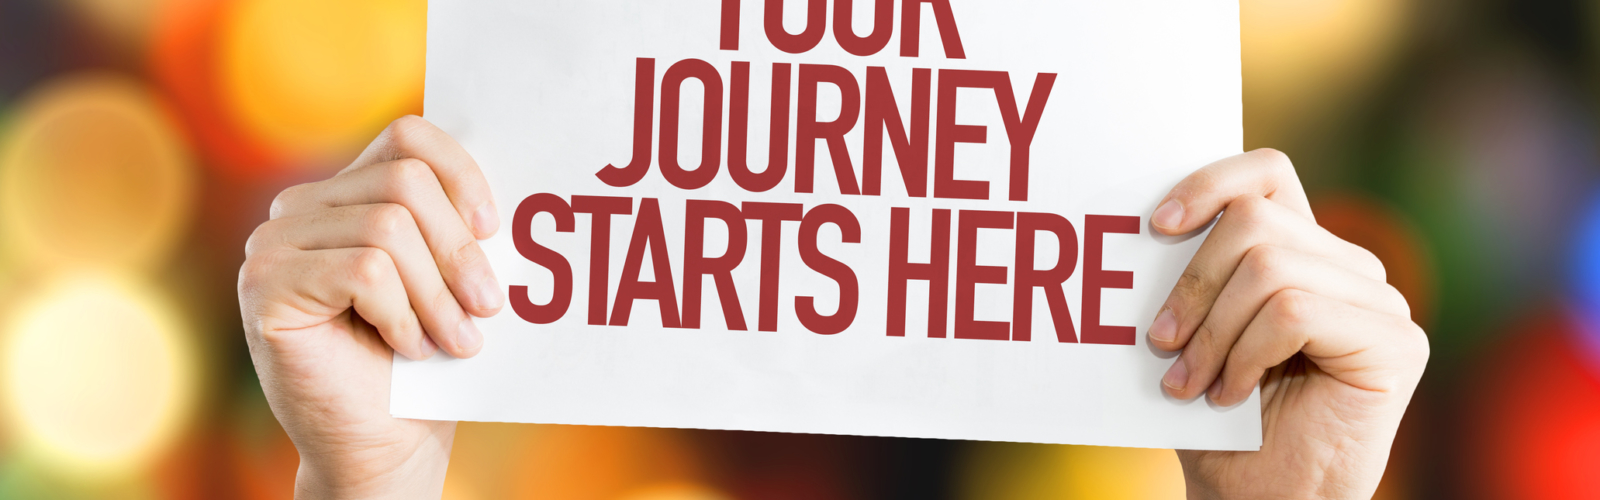 Your Journey Starts Here placard with bokeh background